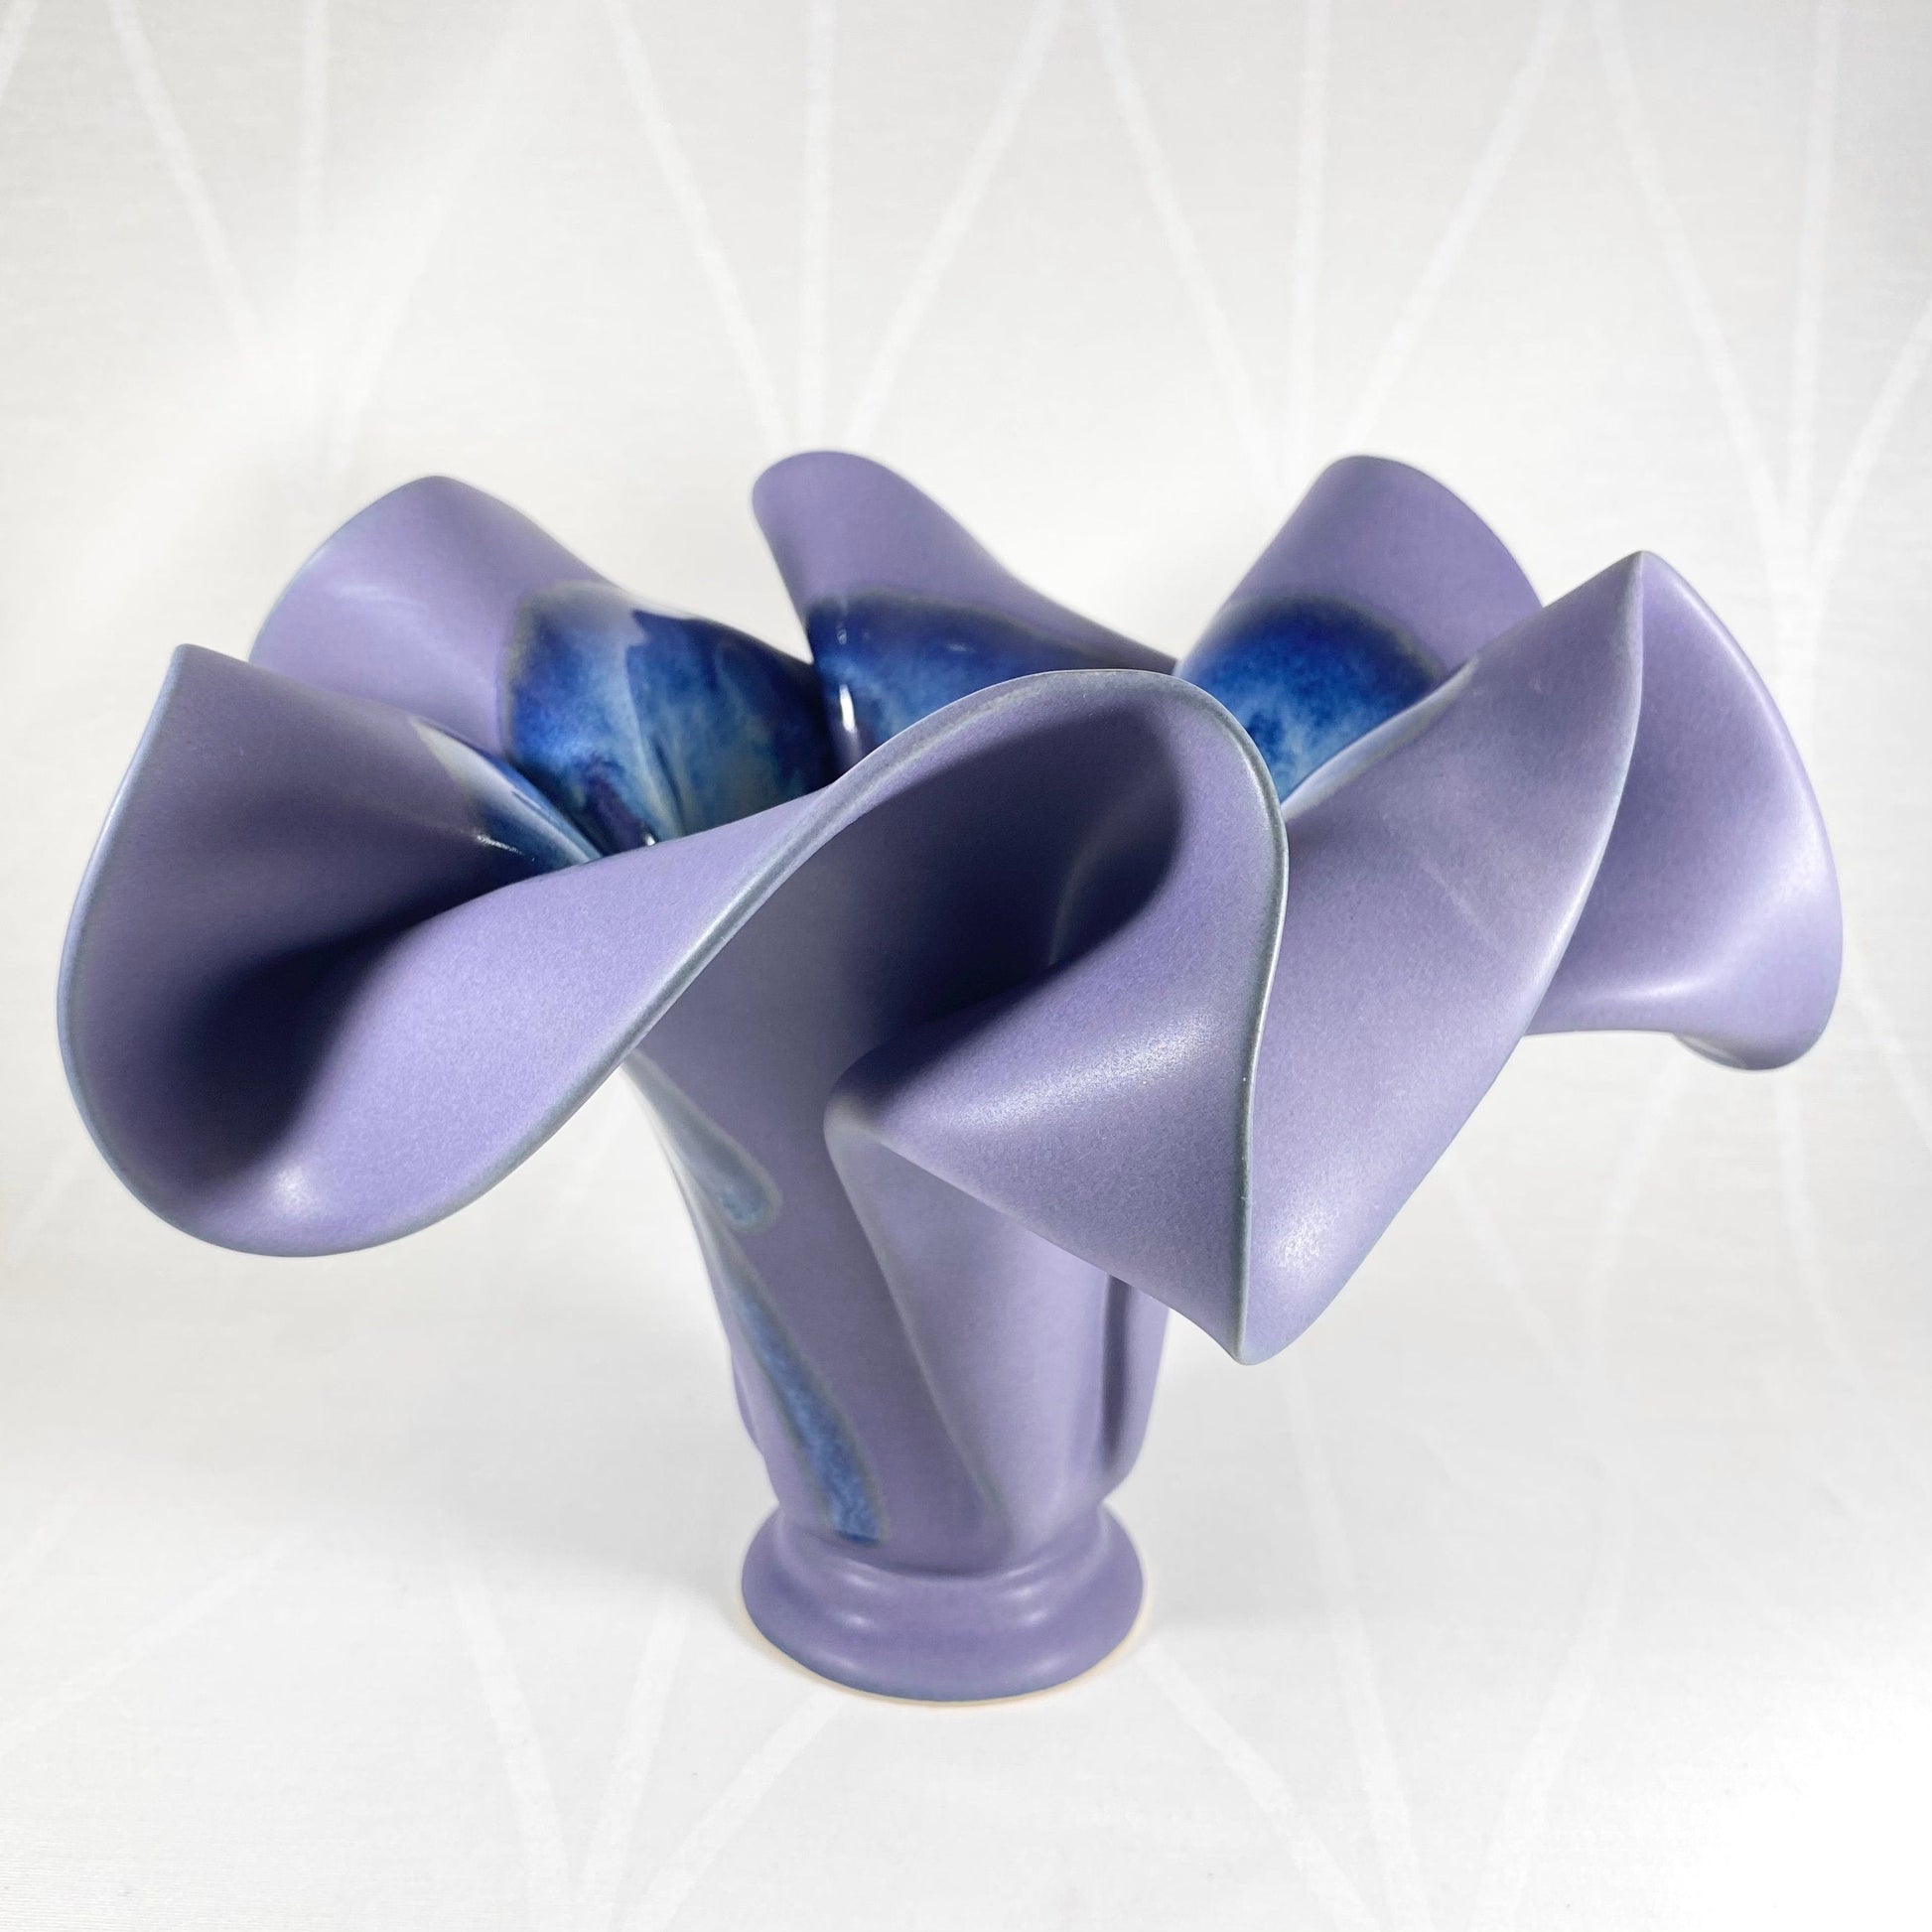 Handmade Purple and Blue Sculpted Vase, Functional and Decorative Pottery